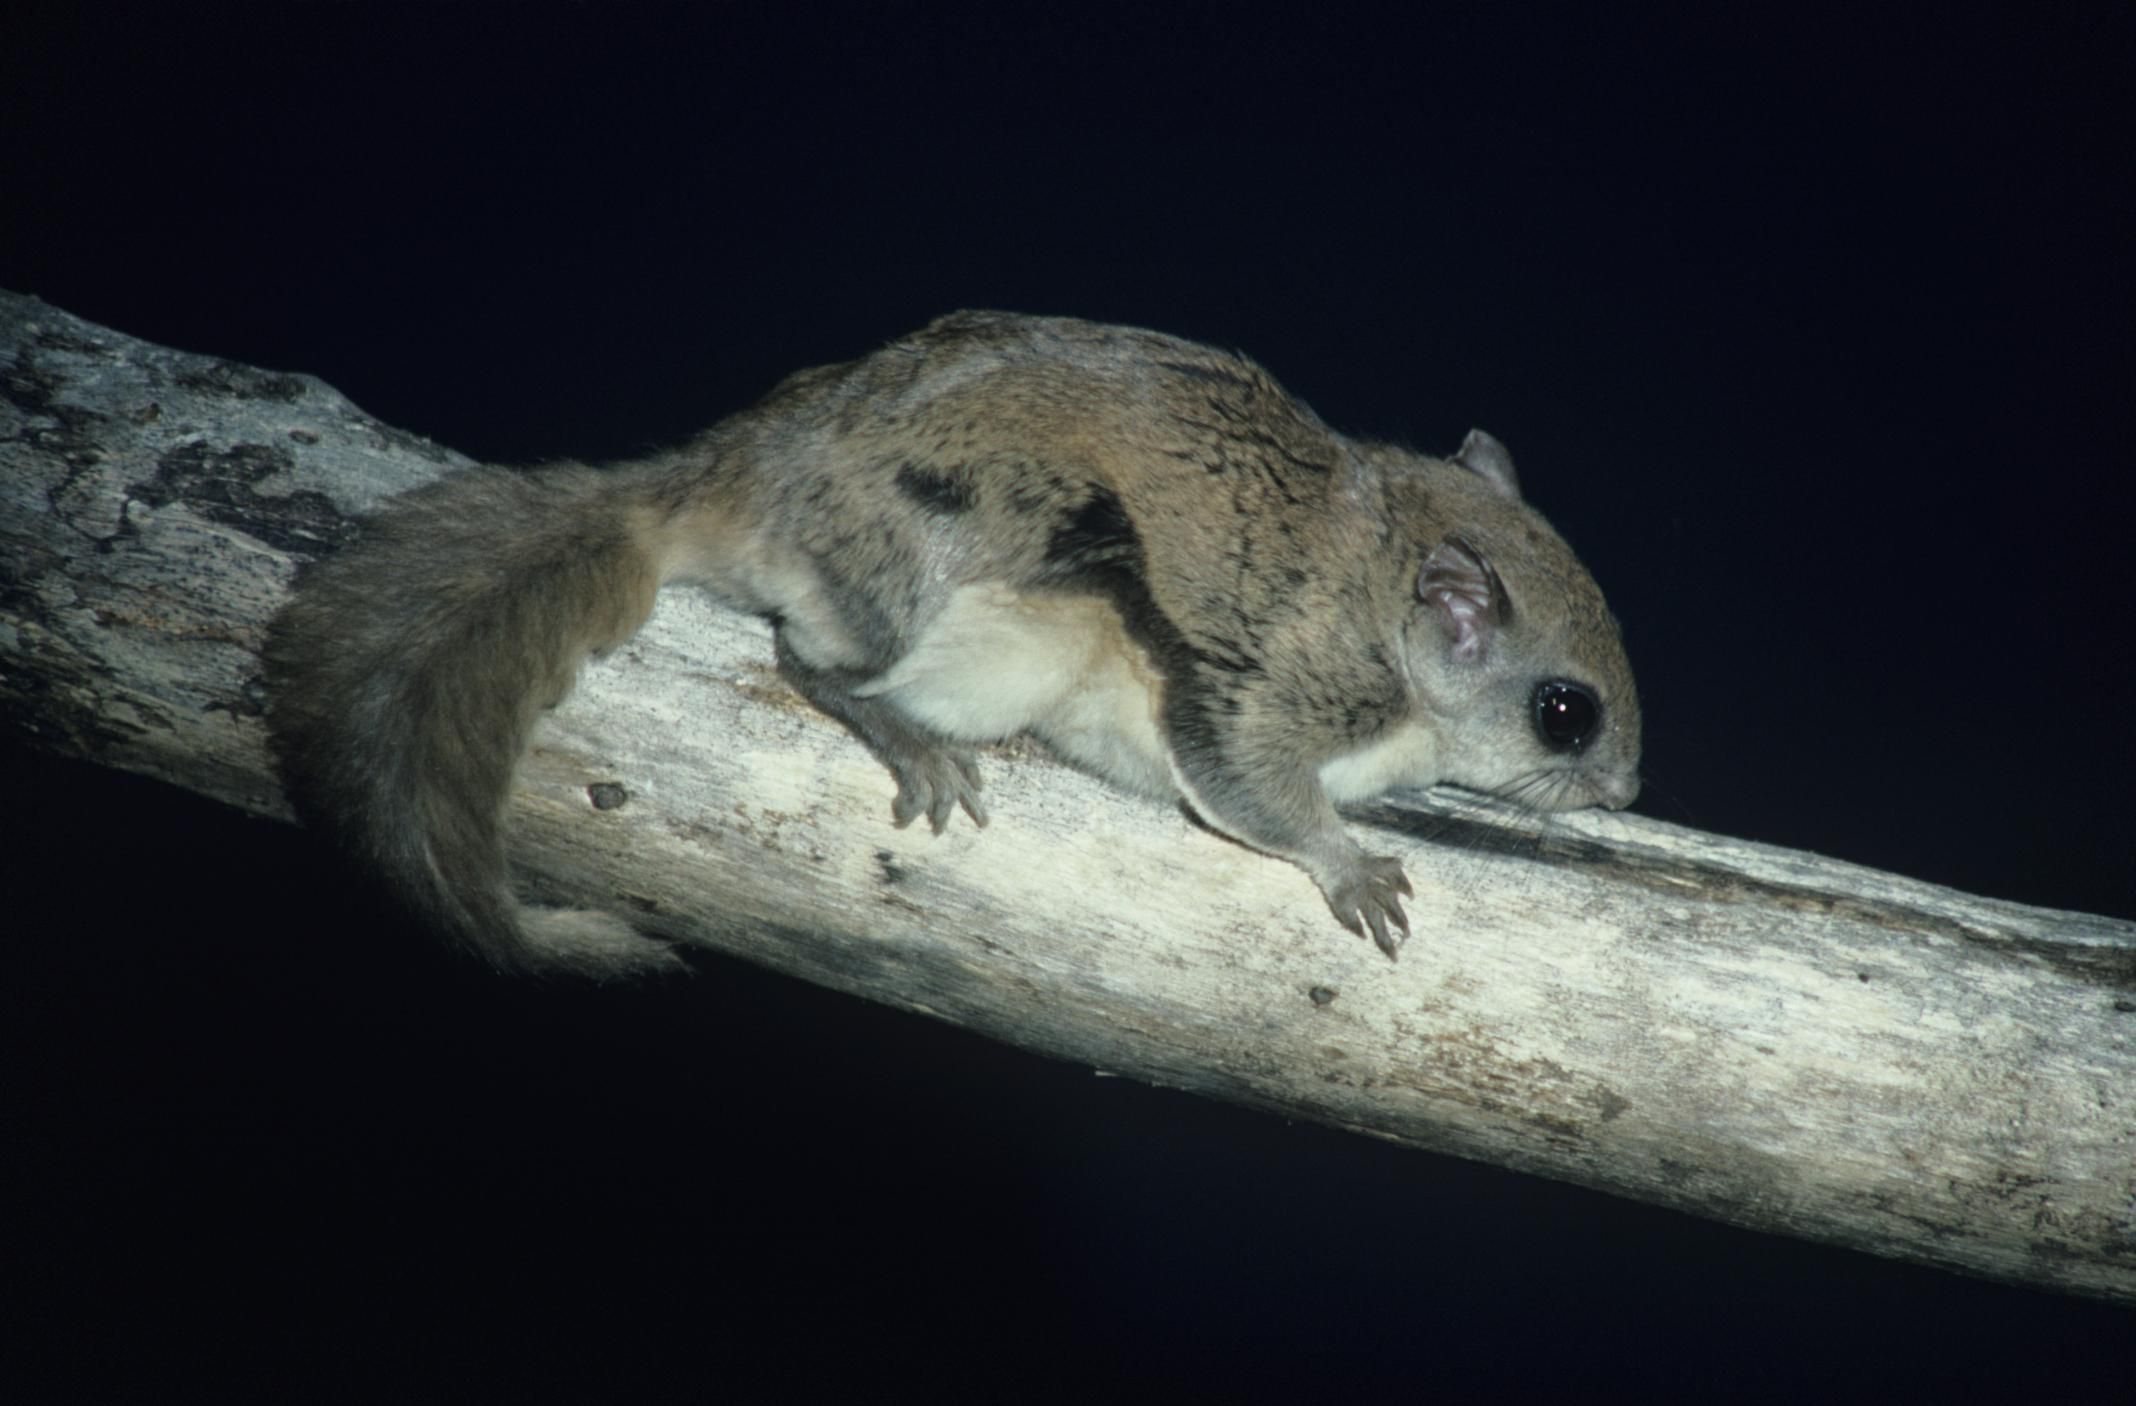 southern flying squirrel